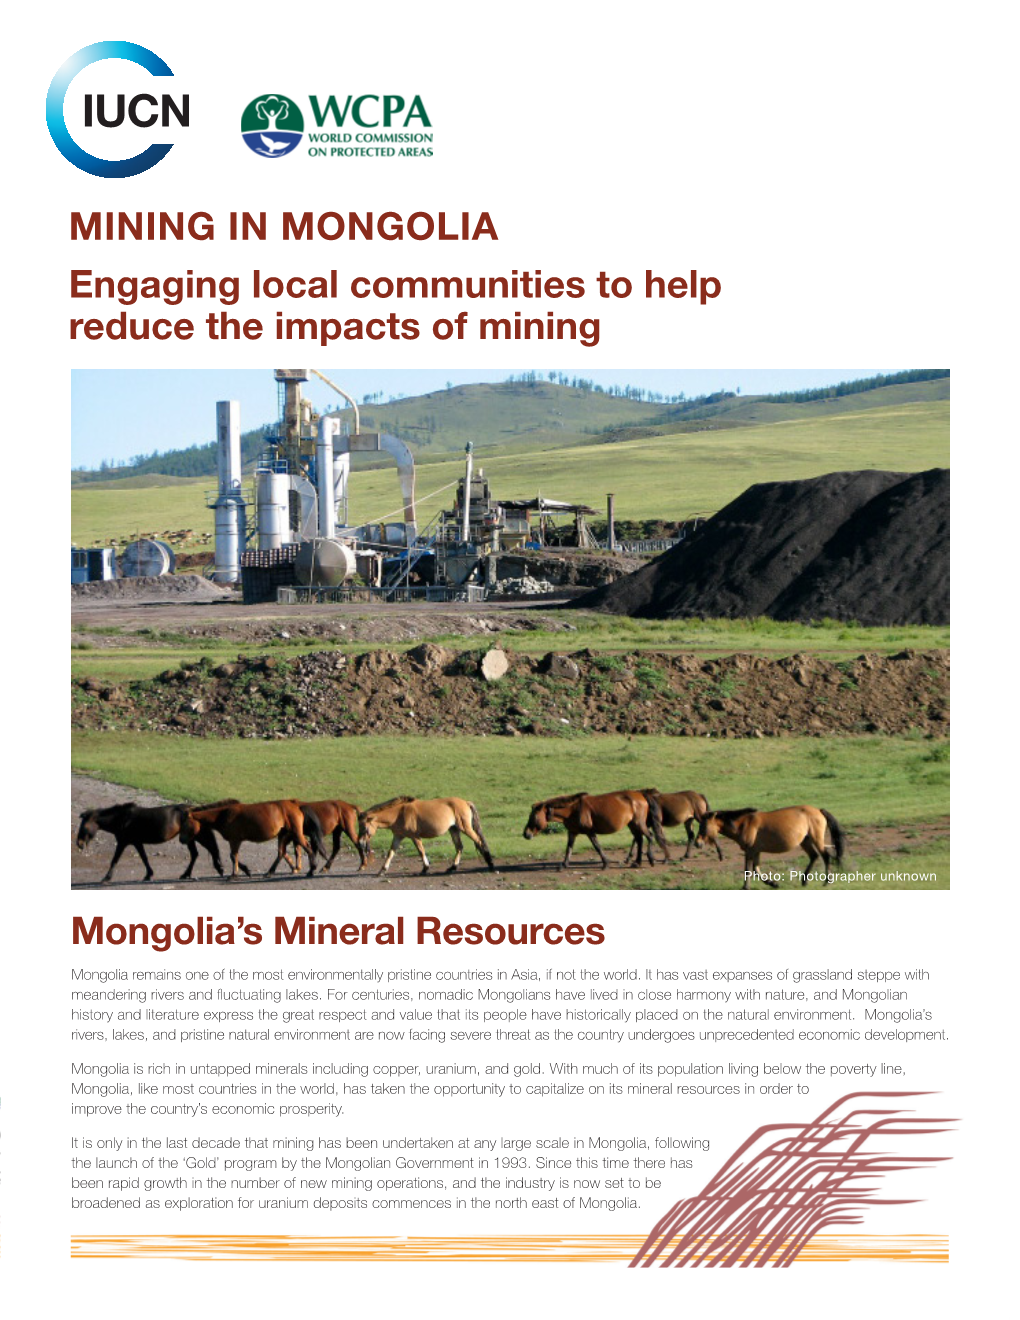 MINING in MONGOLIA Engaging Local Communities to Help Reduce the Impacts of Mining